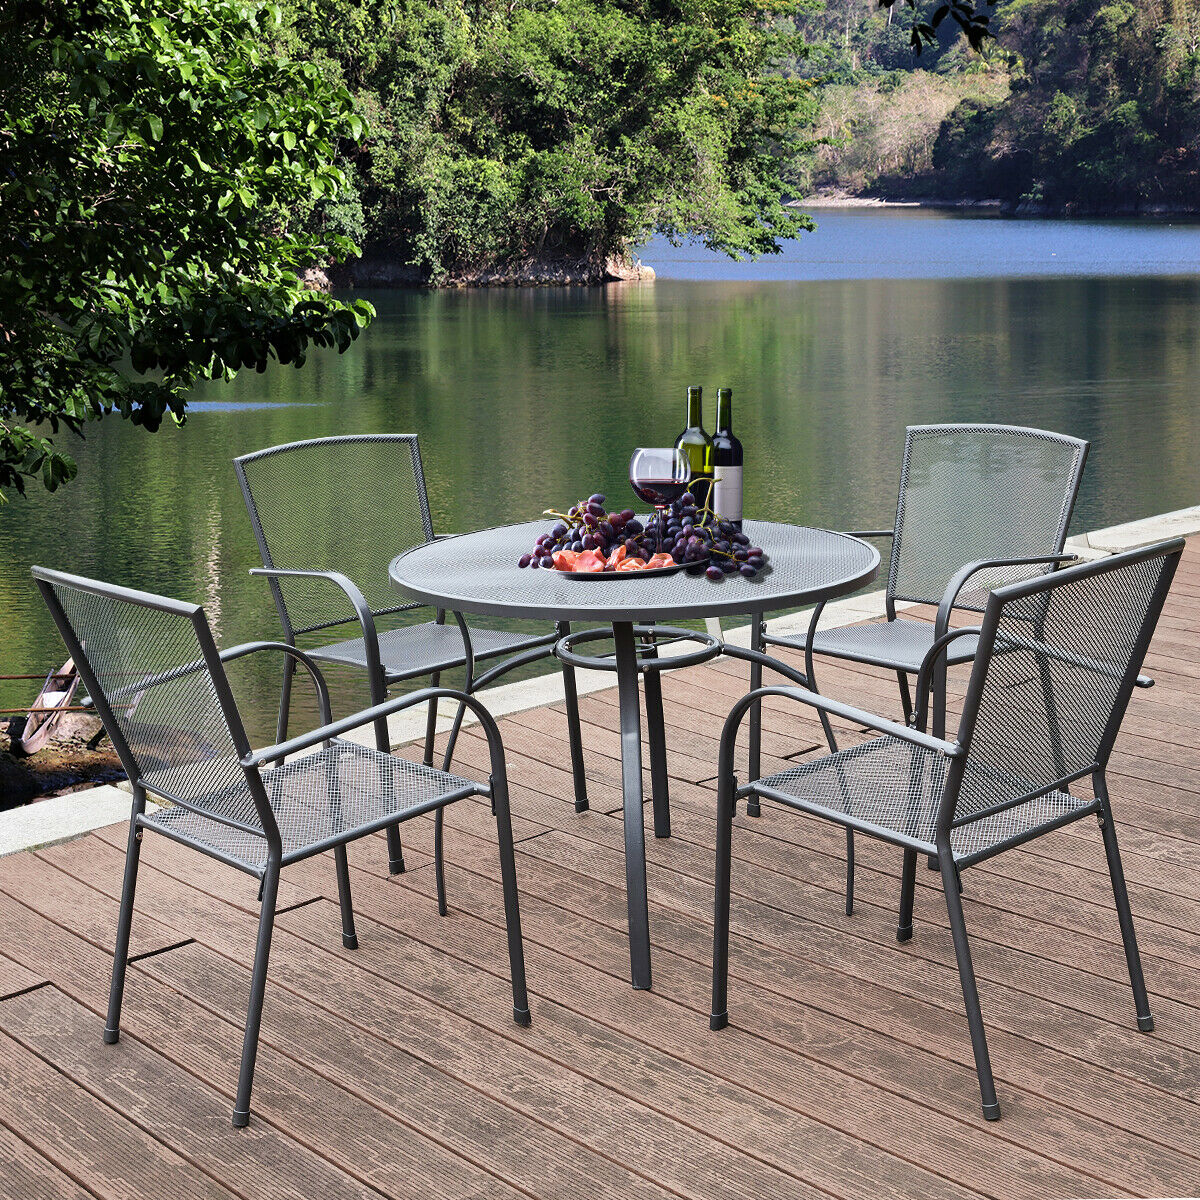 5-Piece Metal Outdoor Dining Set W/ Round Table 4 Chairs Patio Furniture Grey